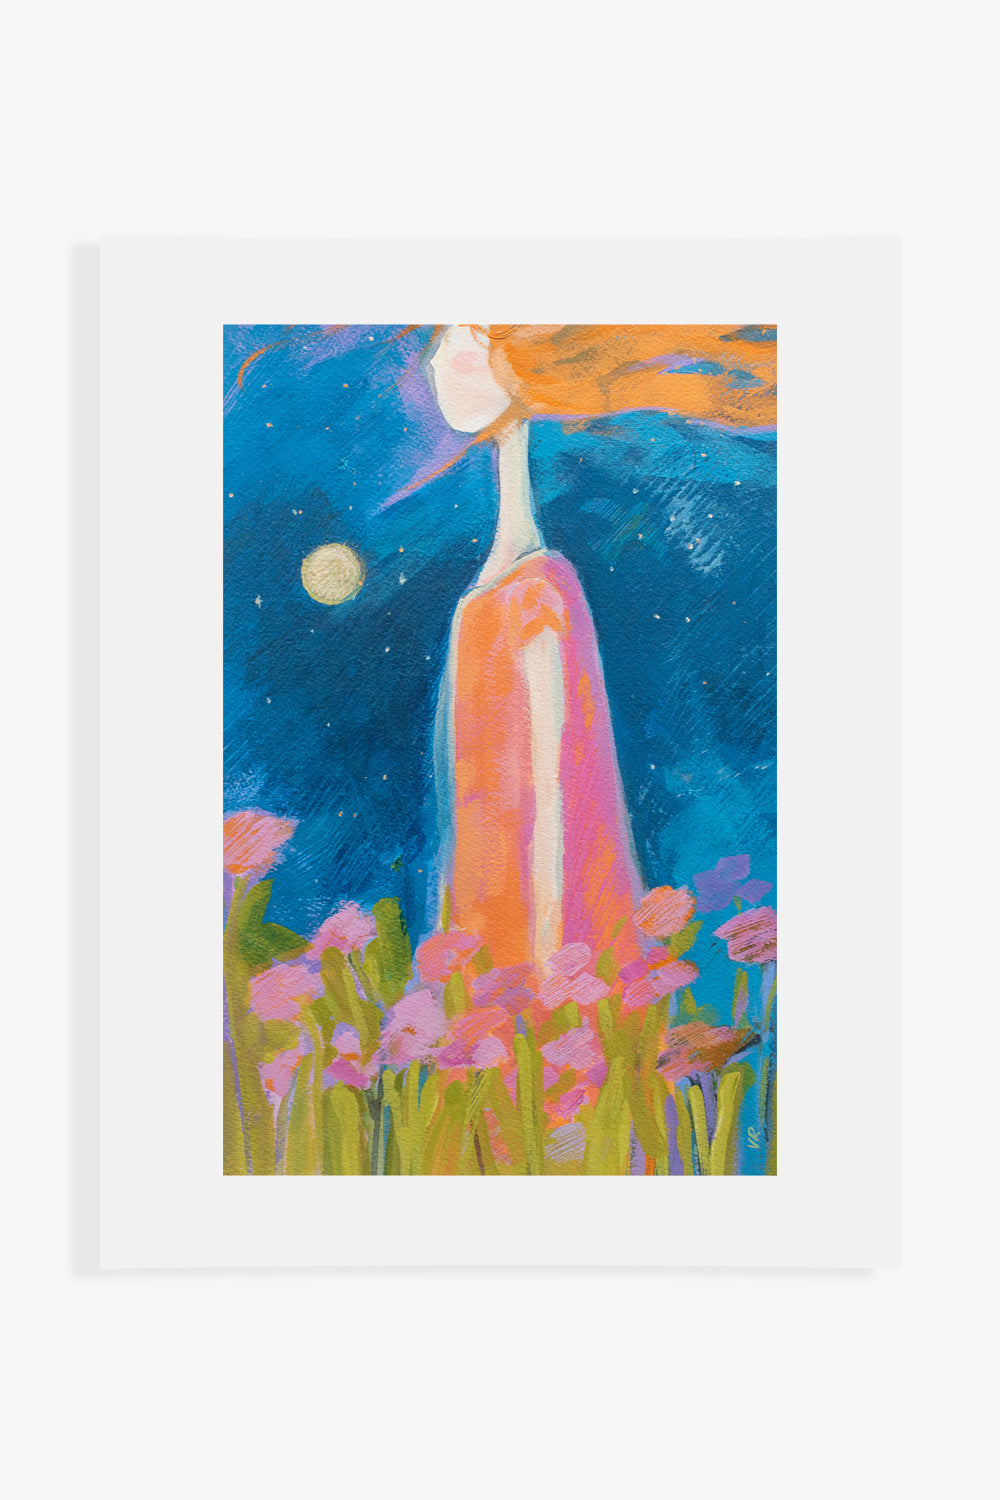 "She by the Moon" Print - Sister Golden